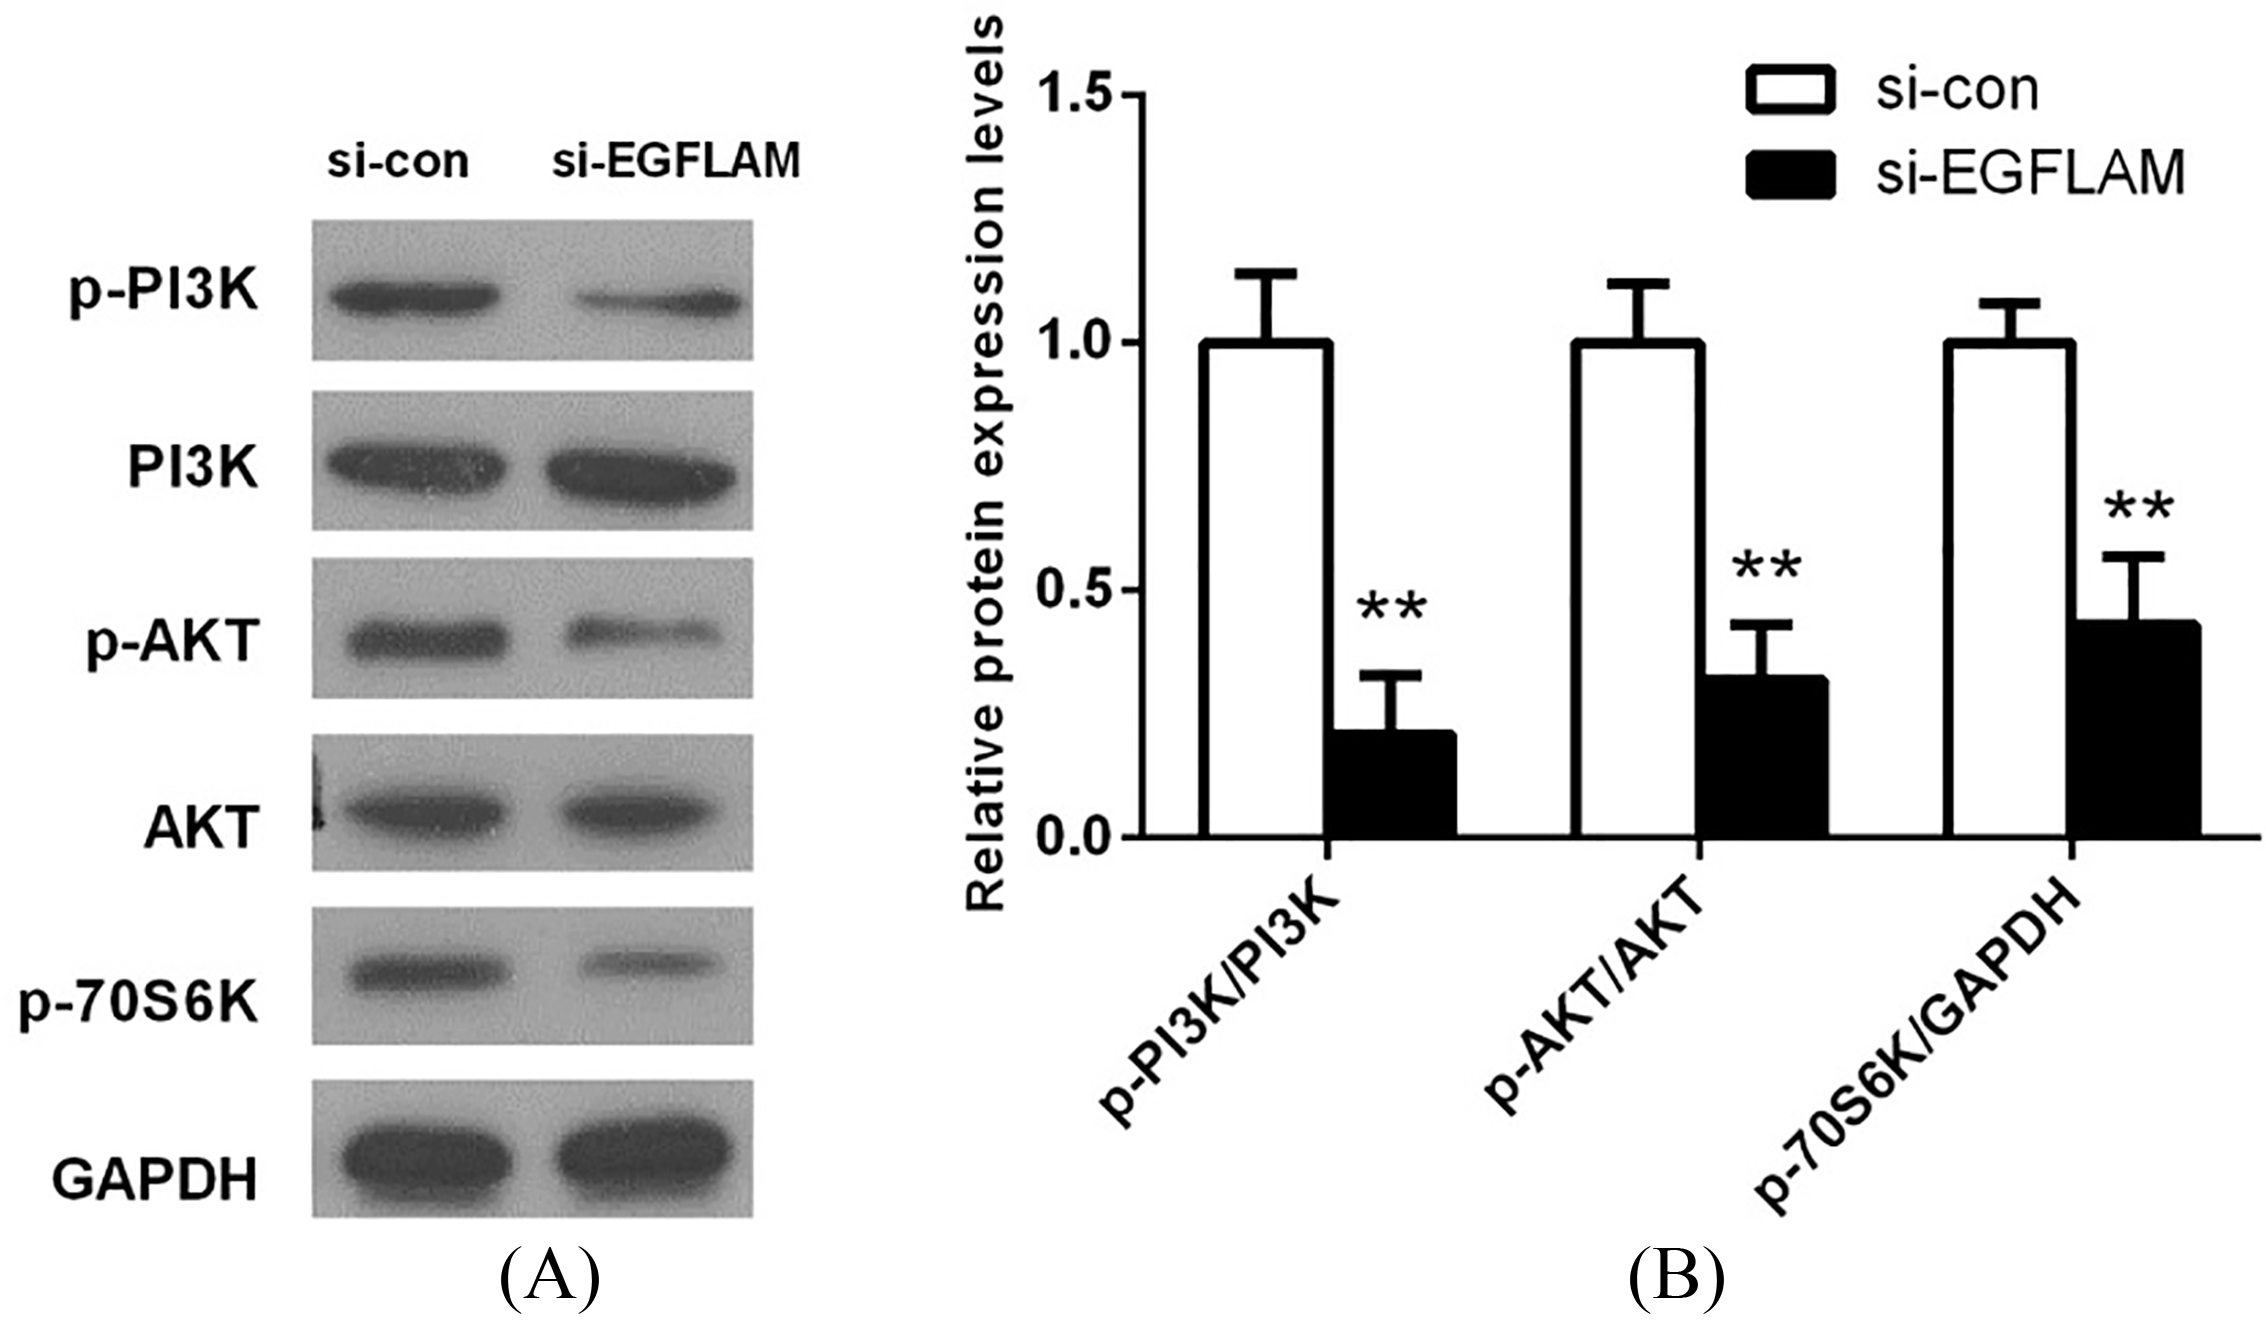 EGFLAM induced the activation of PI3K/AKT pathway. (A) The expression levels of PI3K, p-PI3K (Tyr199), AKT, p-AKT (Ser473) and p-P70S6K (Ser371) in PI3K/AKT pathway were measured by western blot. (B) The expression of proteins in PI3K/AKT pathway was quantified and normalized to the GAPDH as a loading control. si-EGFLAM group represents EGFLAM in U87 cells were silenced, and si-con group represents EGFLAM in U87 cells were not silenced. **p< 0.01 versus si-con group.